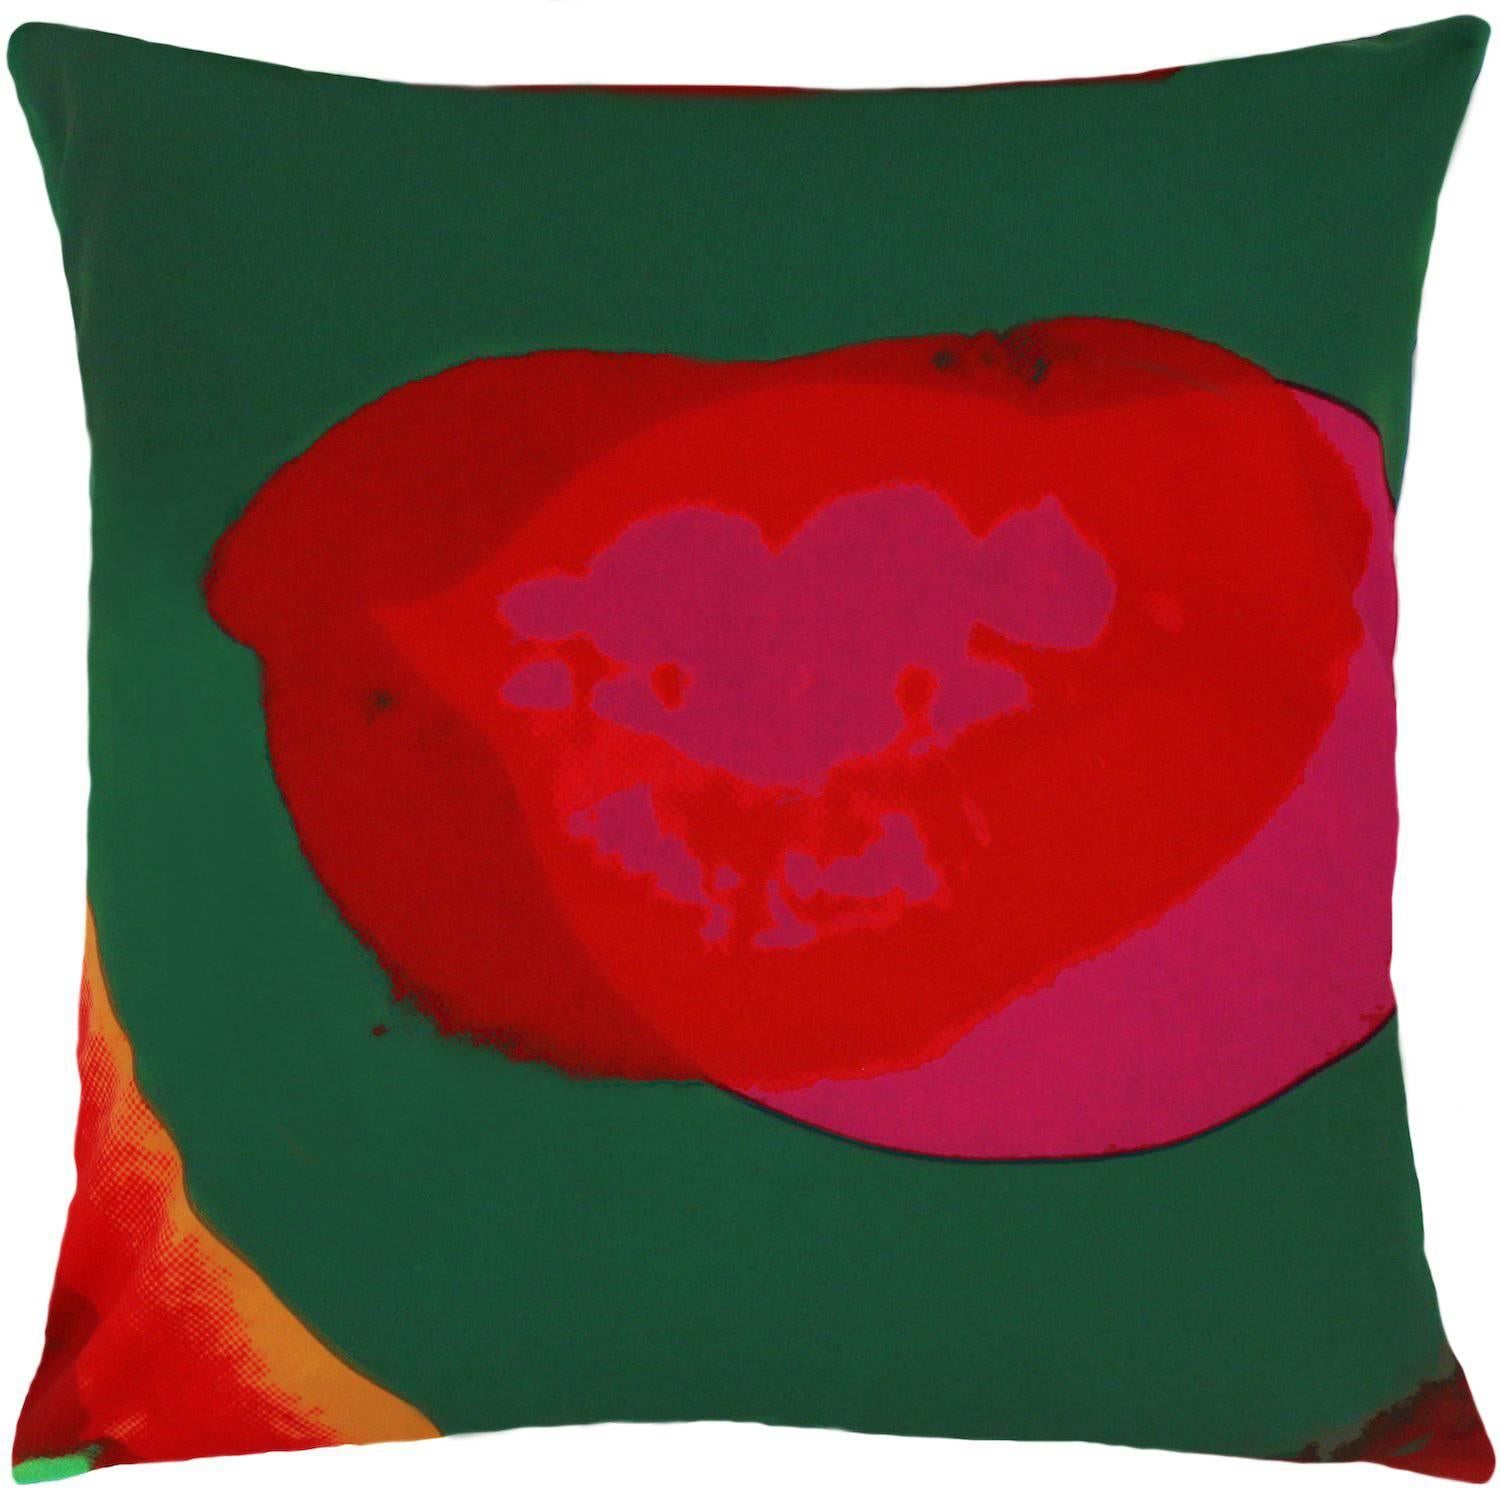 Limited Edition Andy Warhol Marilyn Monroe Throw Cushion for Henzel Studios For Sale